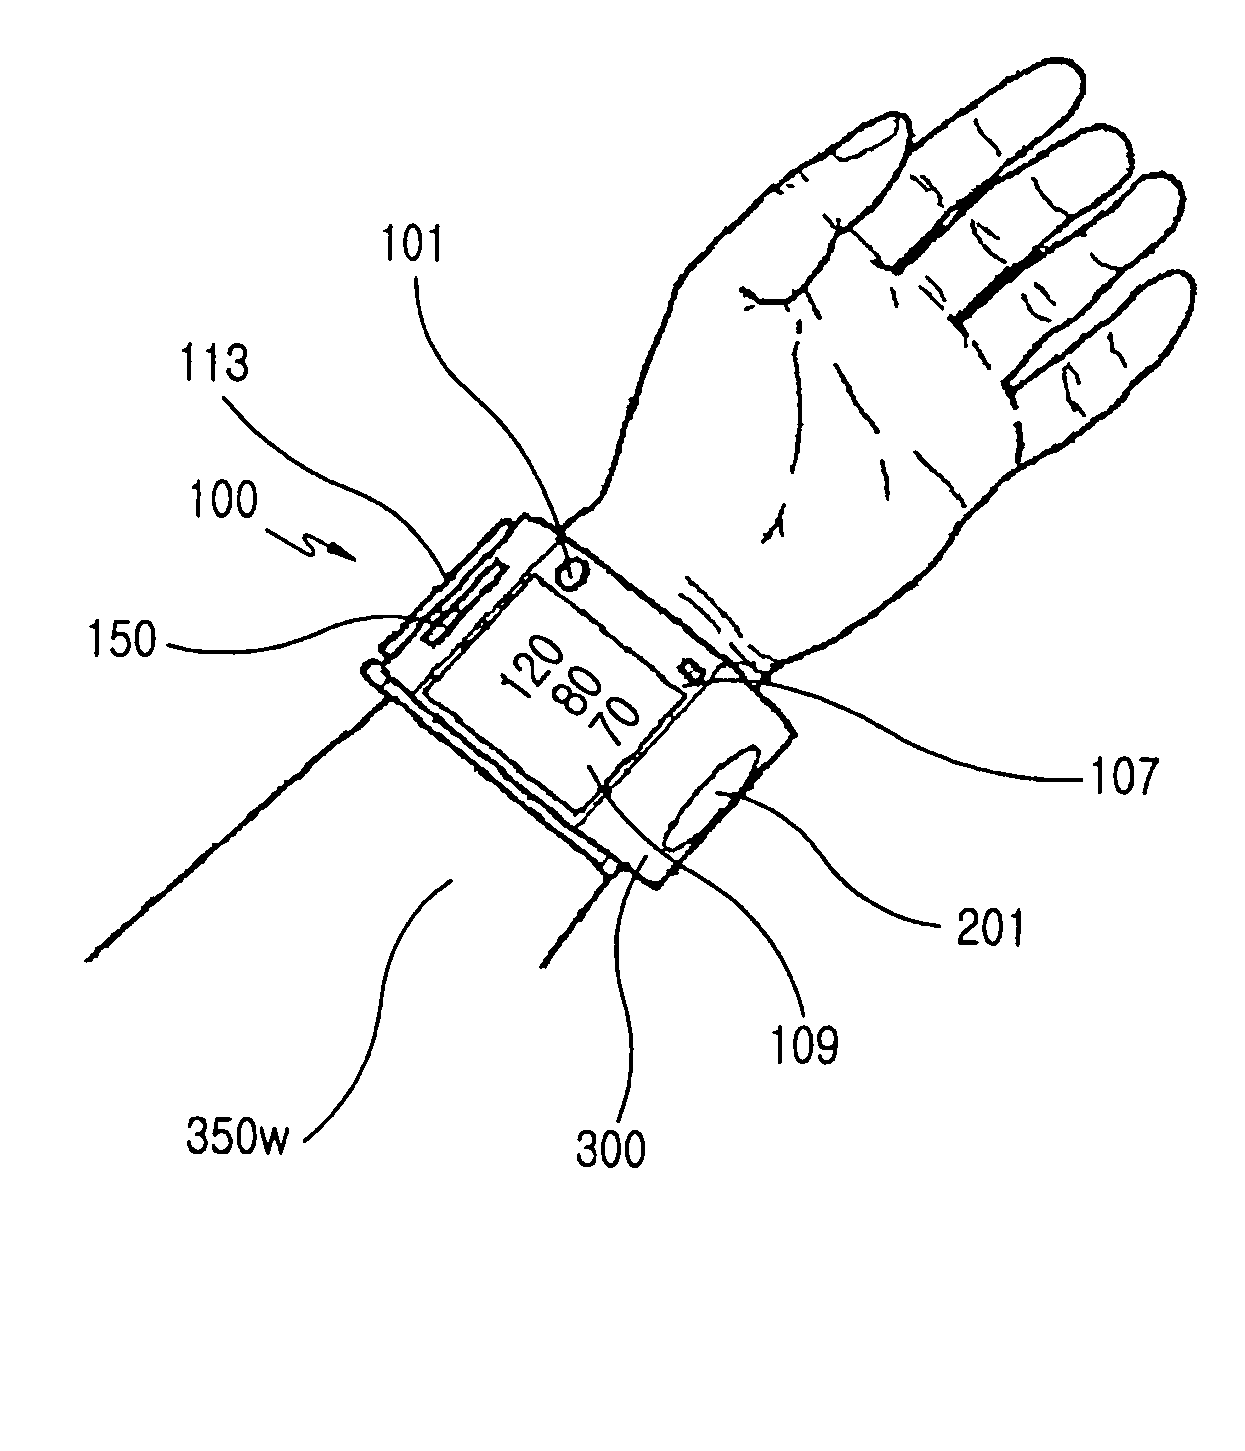 Method and apparatus for cufflessly and non-invasively measuring wrist blood pressure in association with communication device